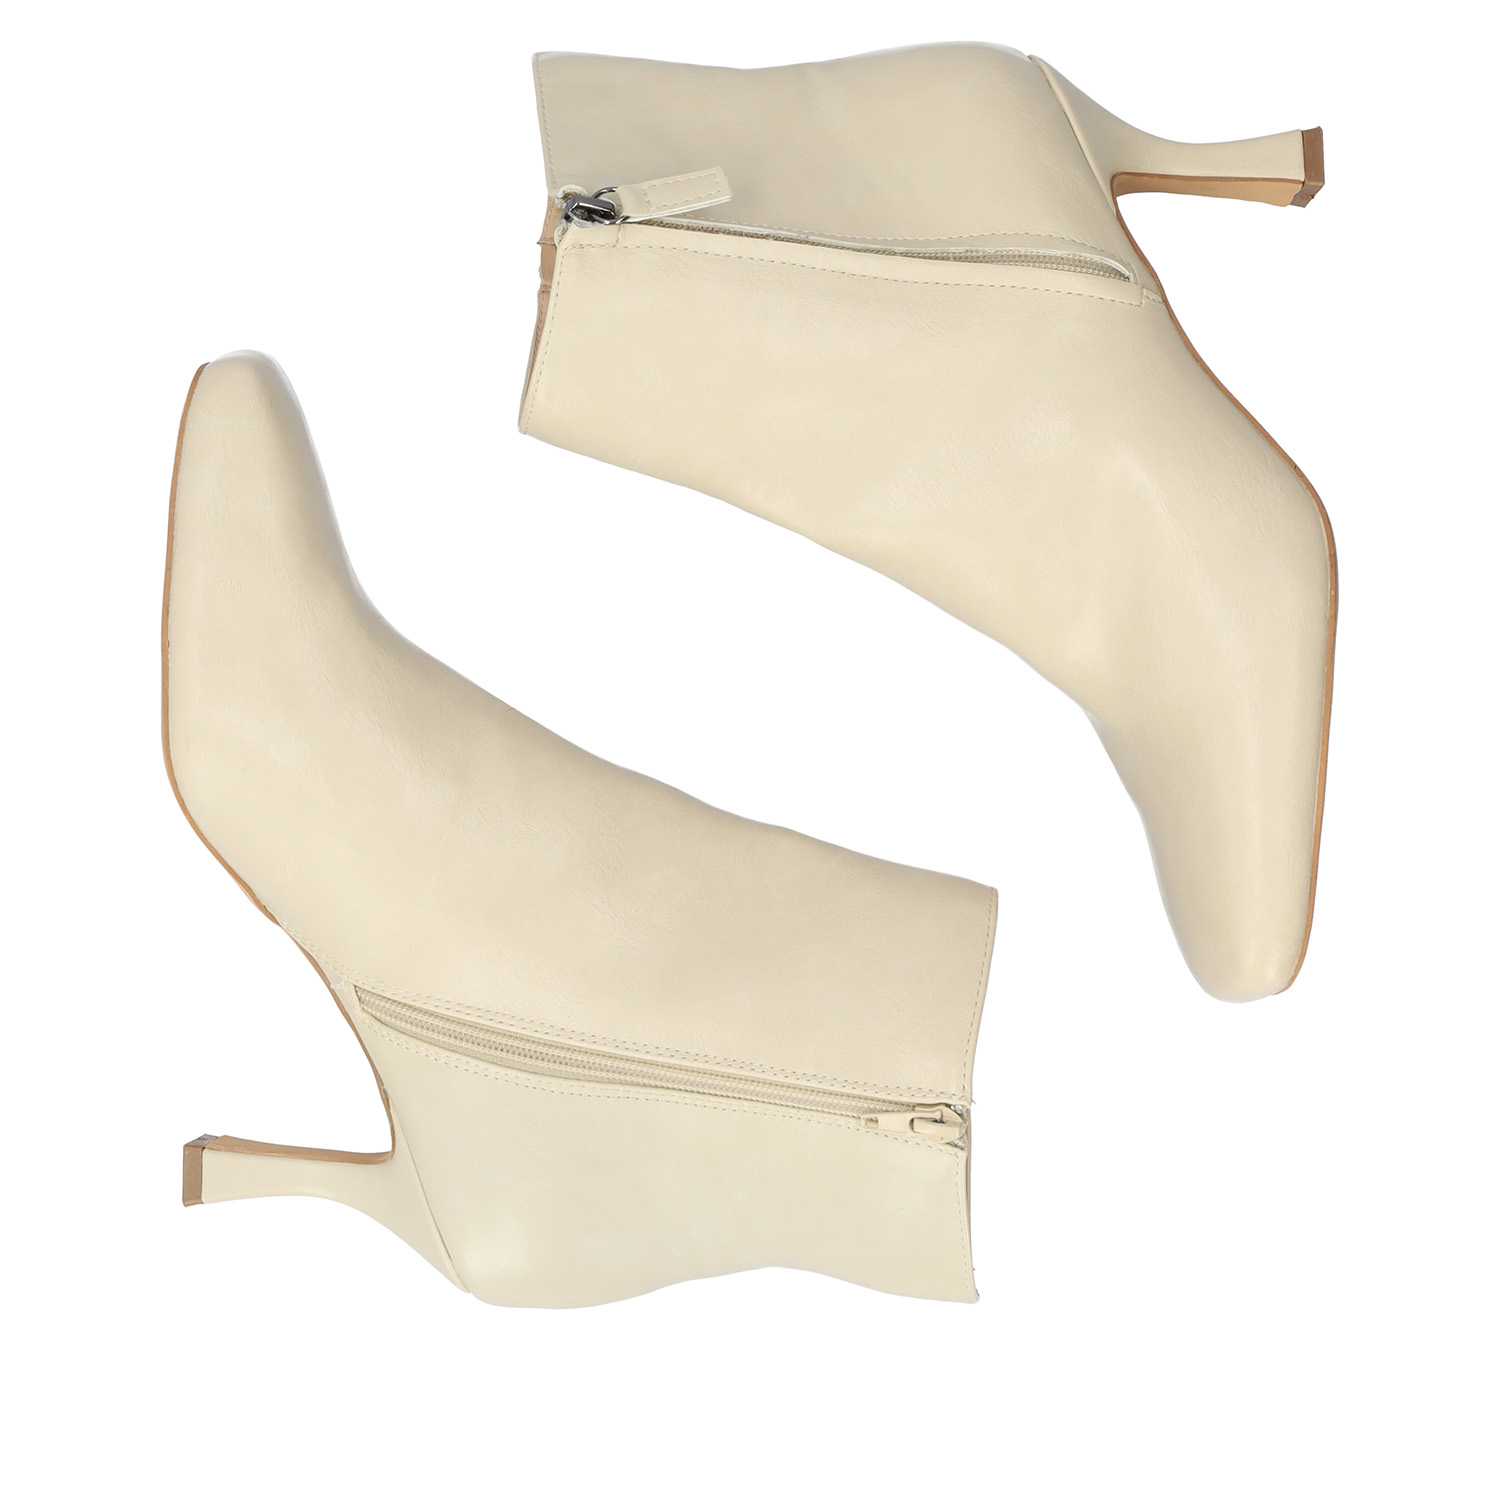 Mid-heel booties in ivory faux leather 